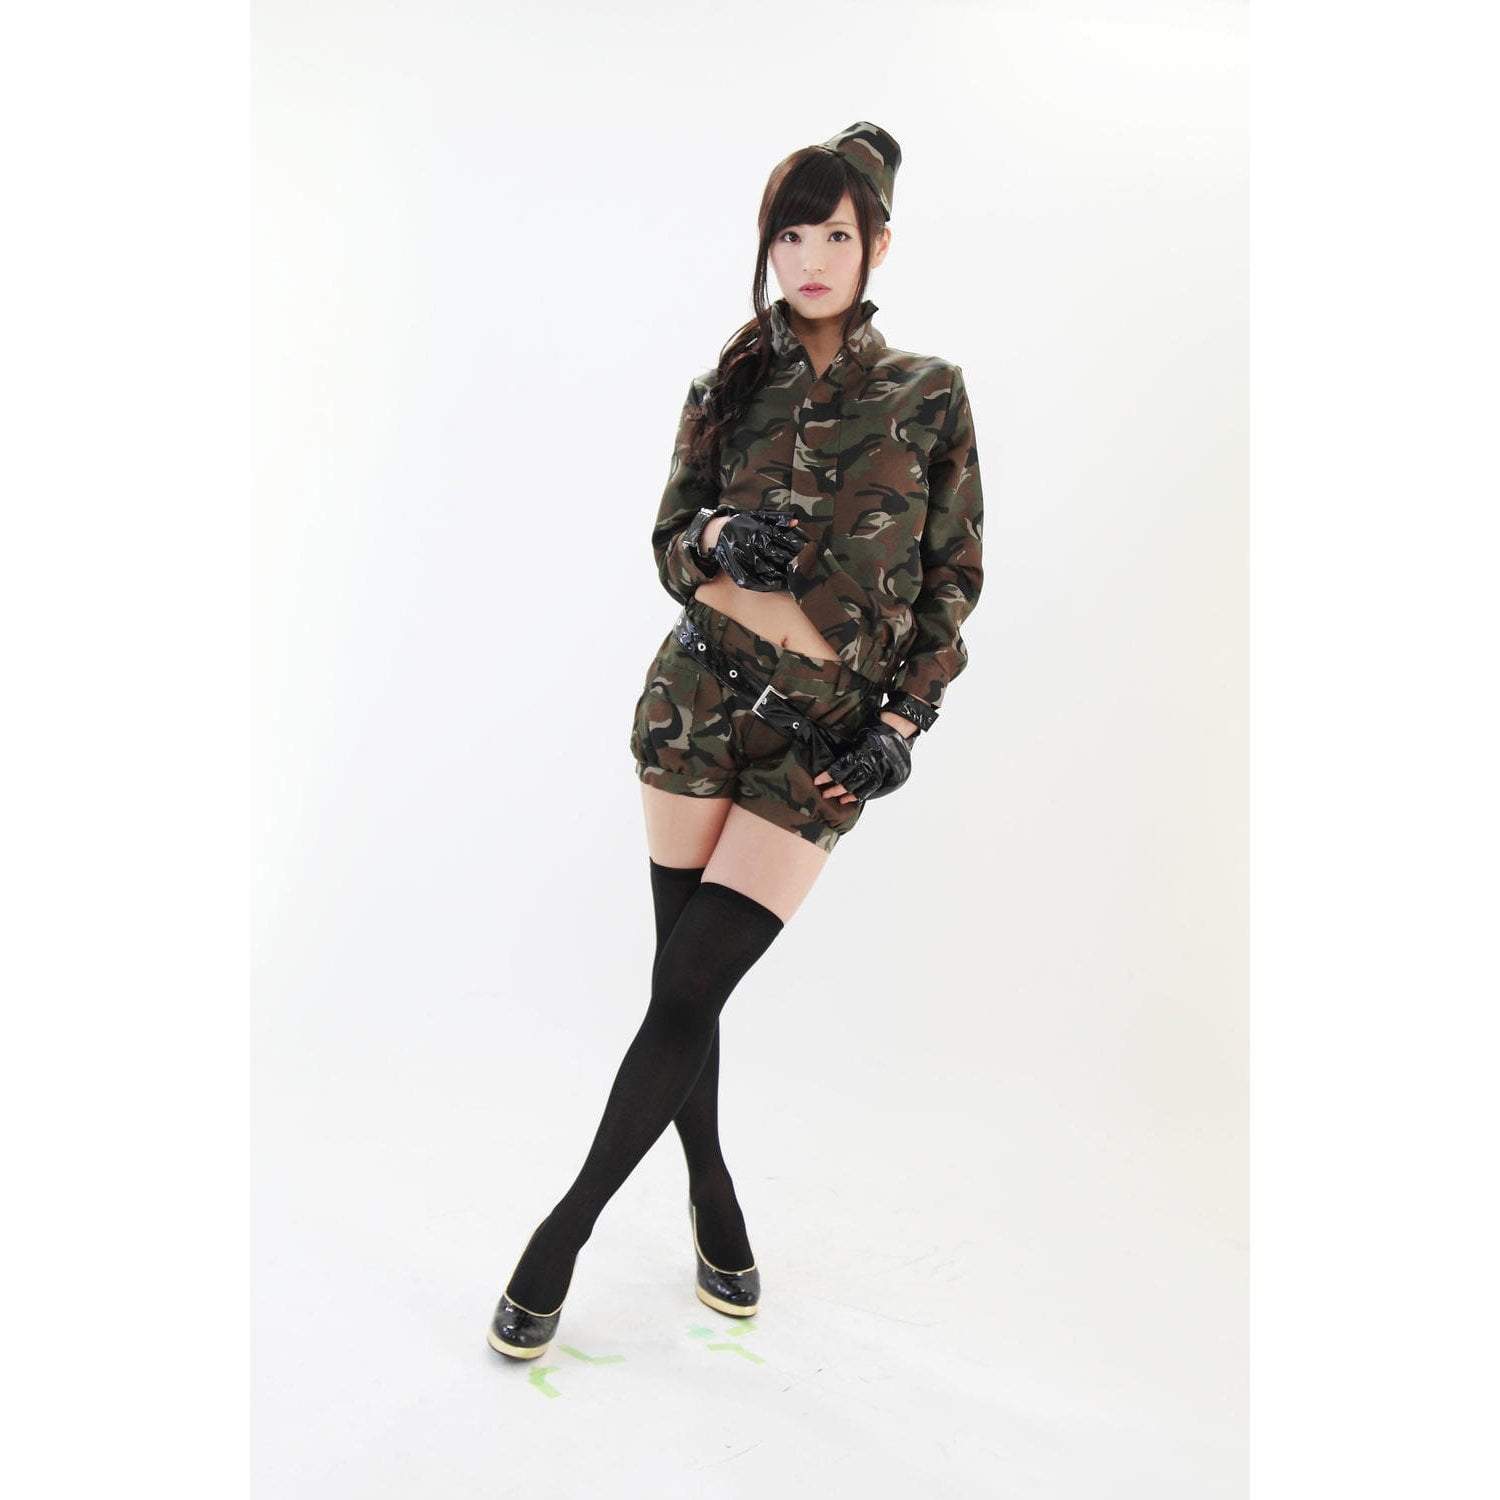 A&T - Metal Gear Army Costume (Multi Colour) Costumes